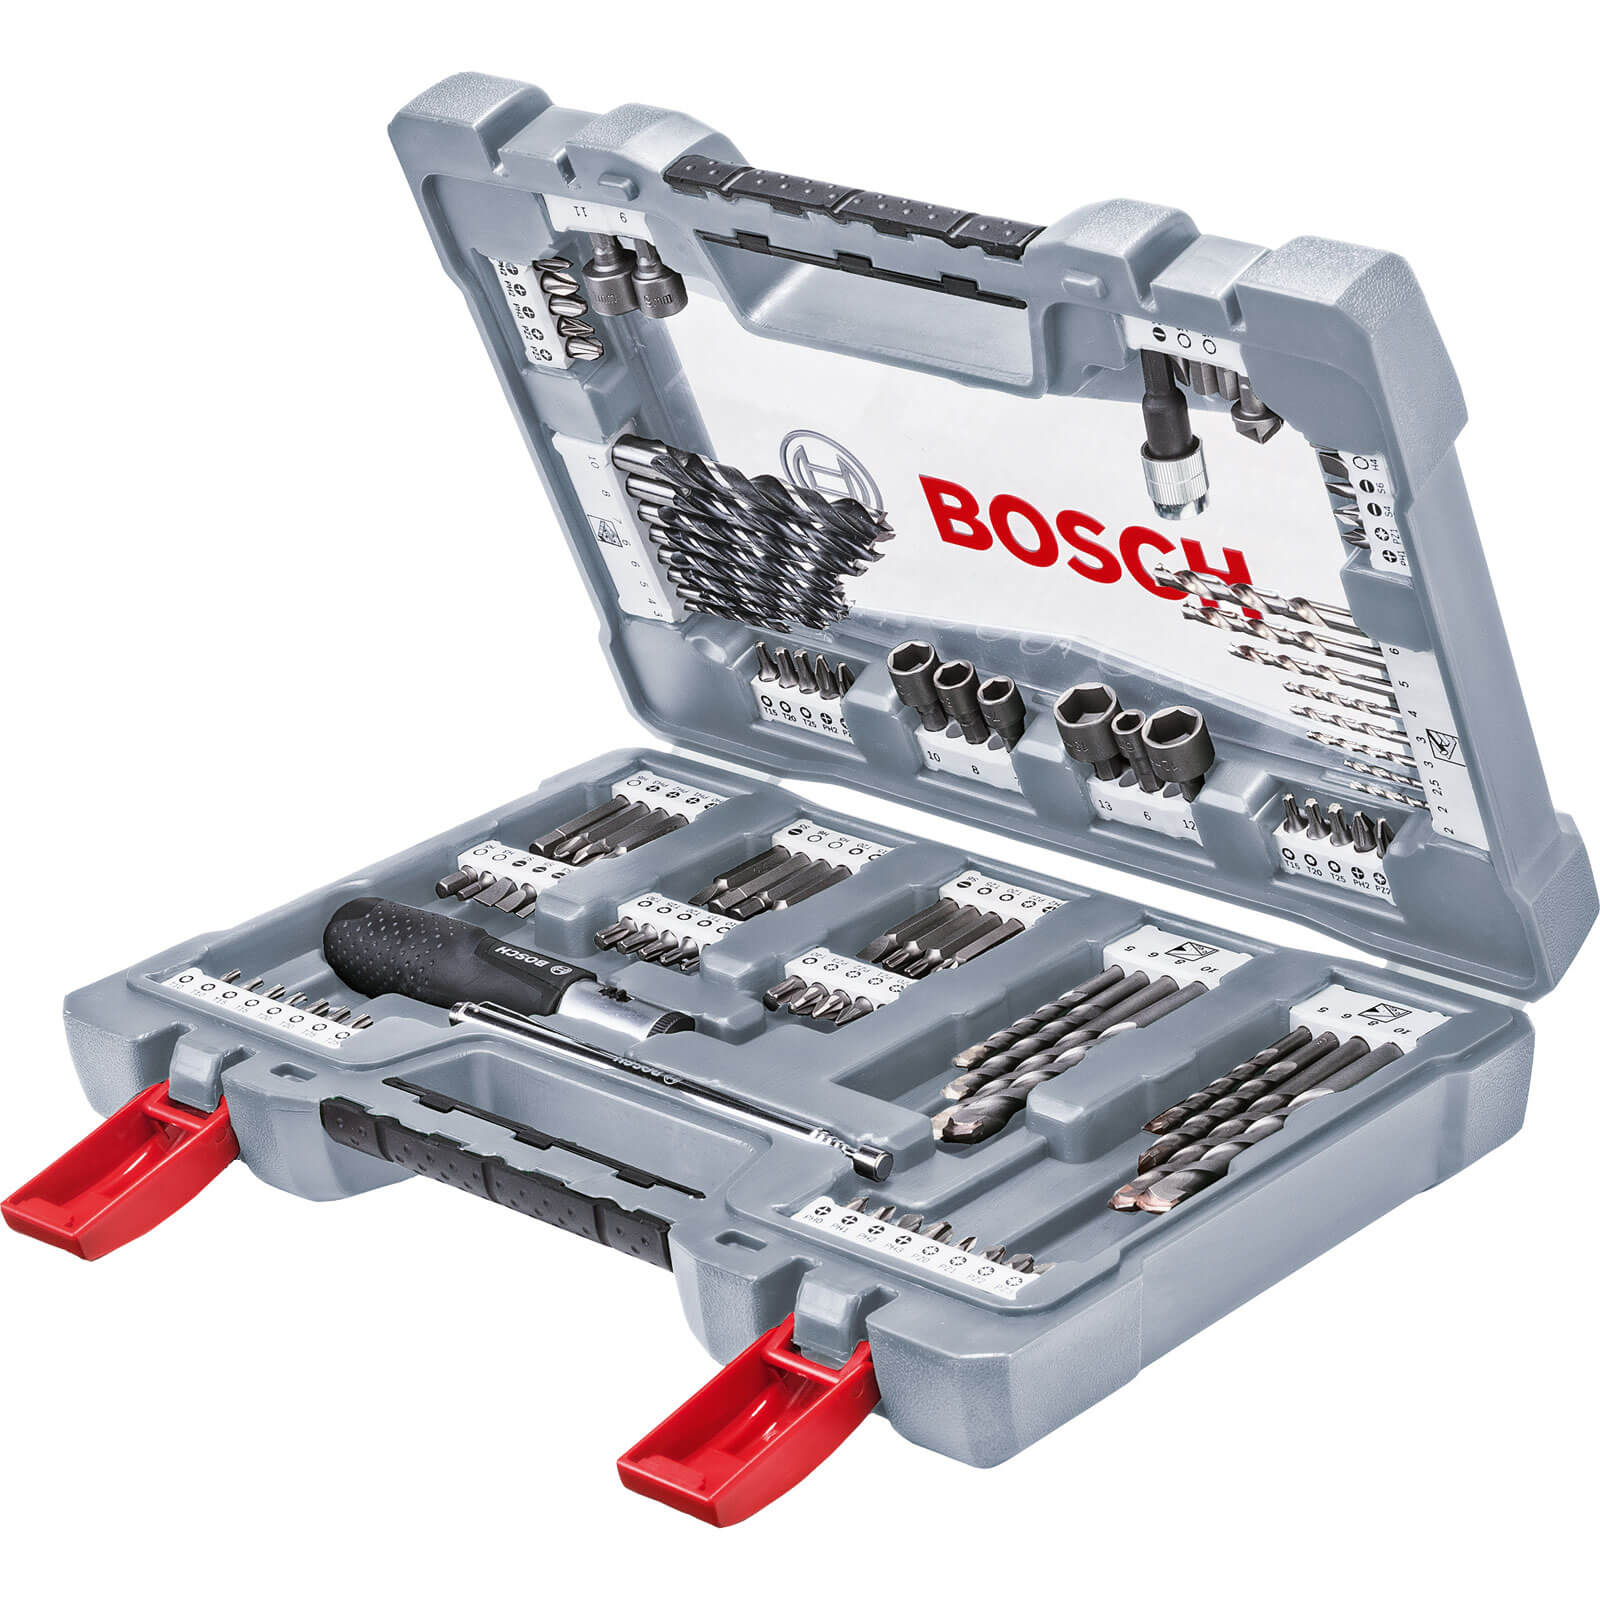 Image of Bosch 105 Piece Premium Power Tool Accessory Drill and Screwdriver Bit Set